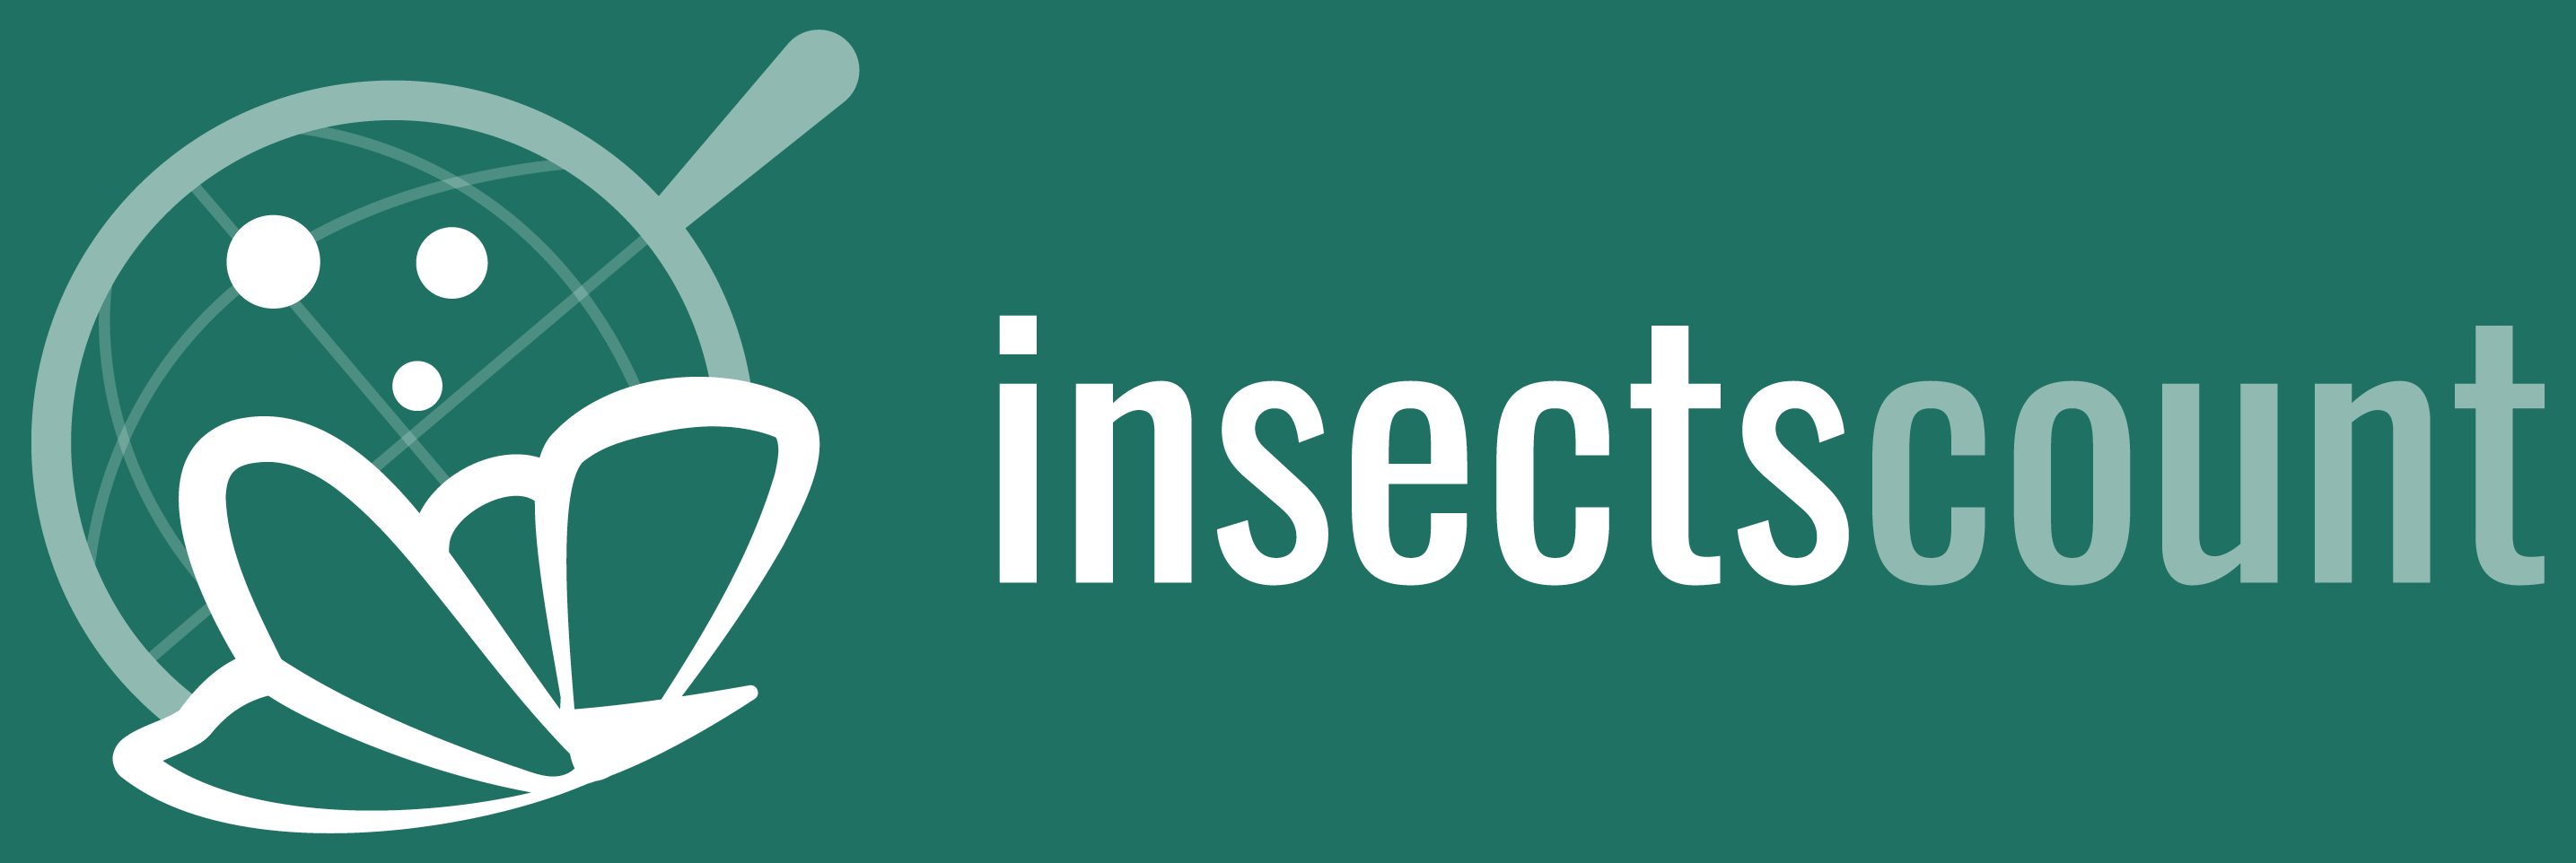 InsectsCount logo